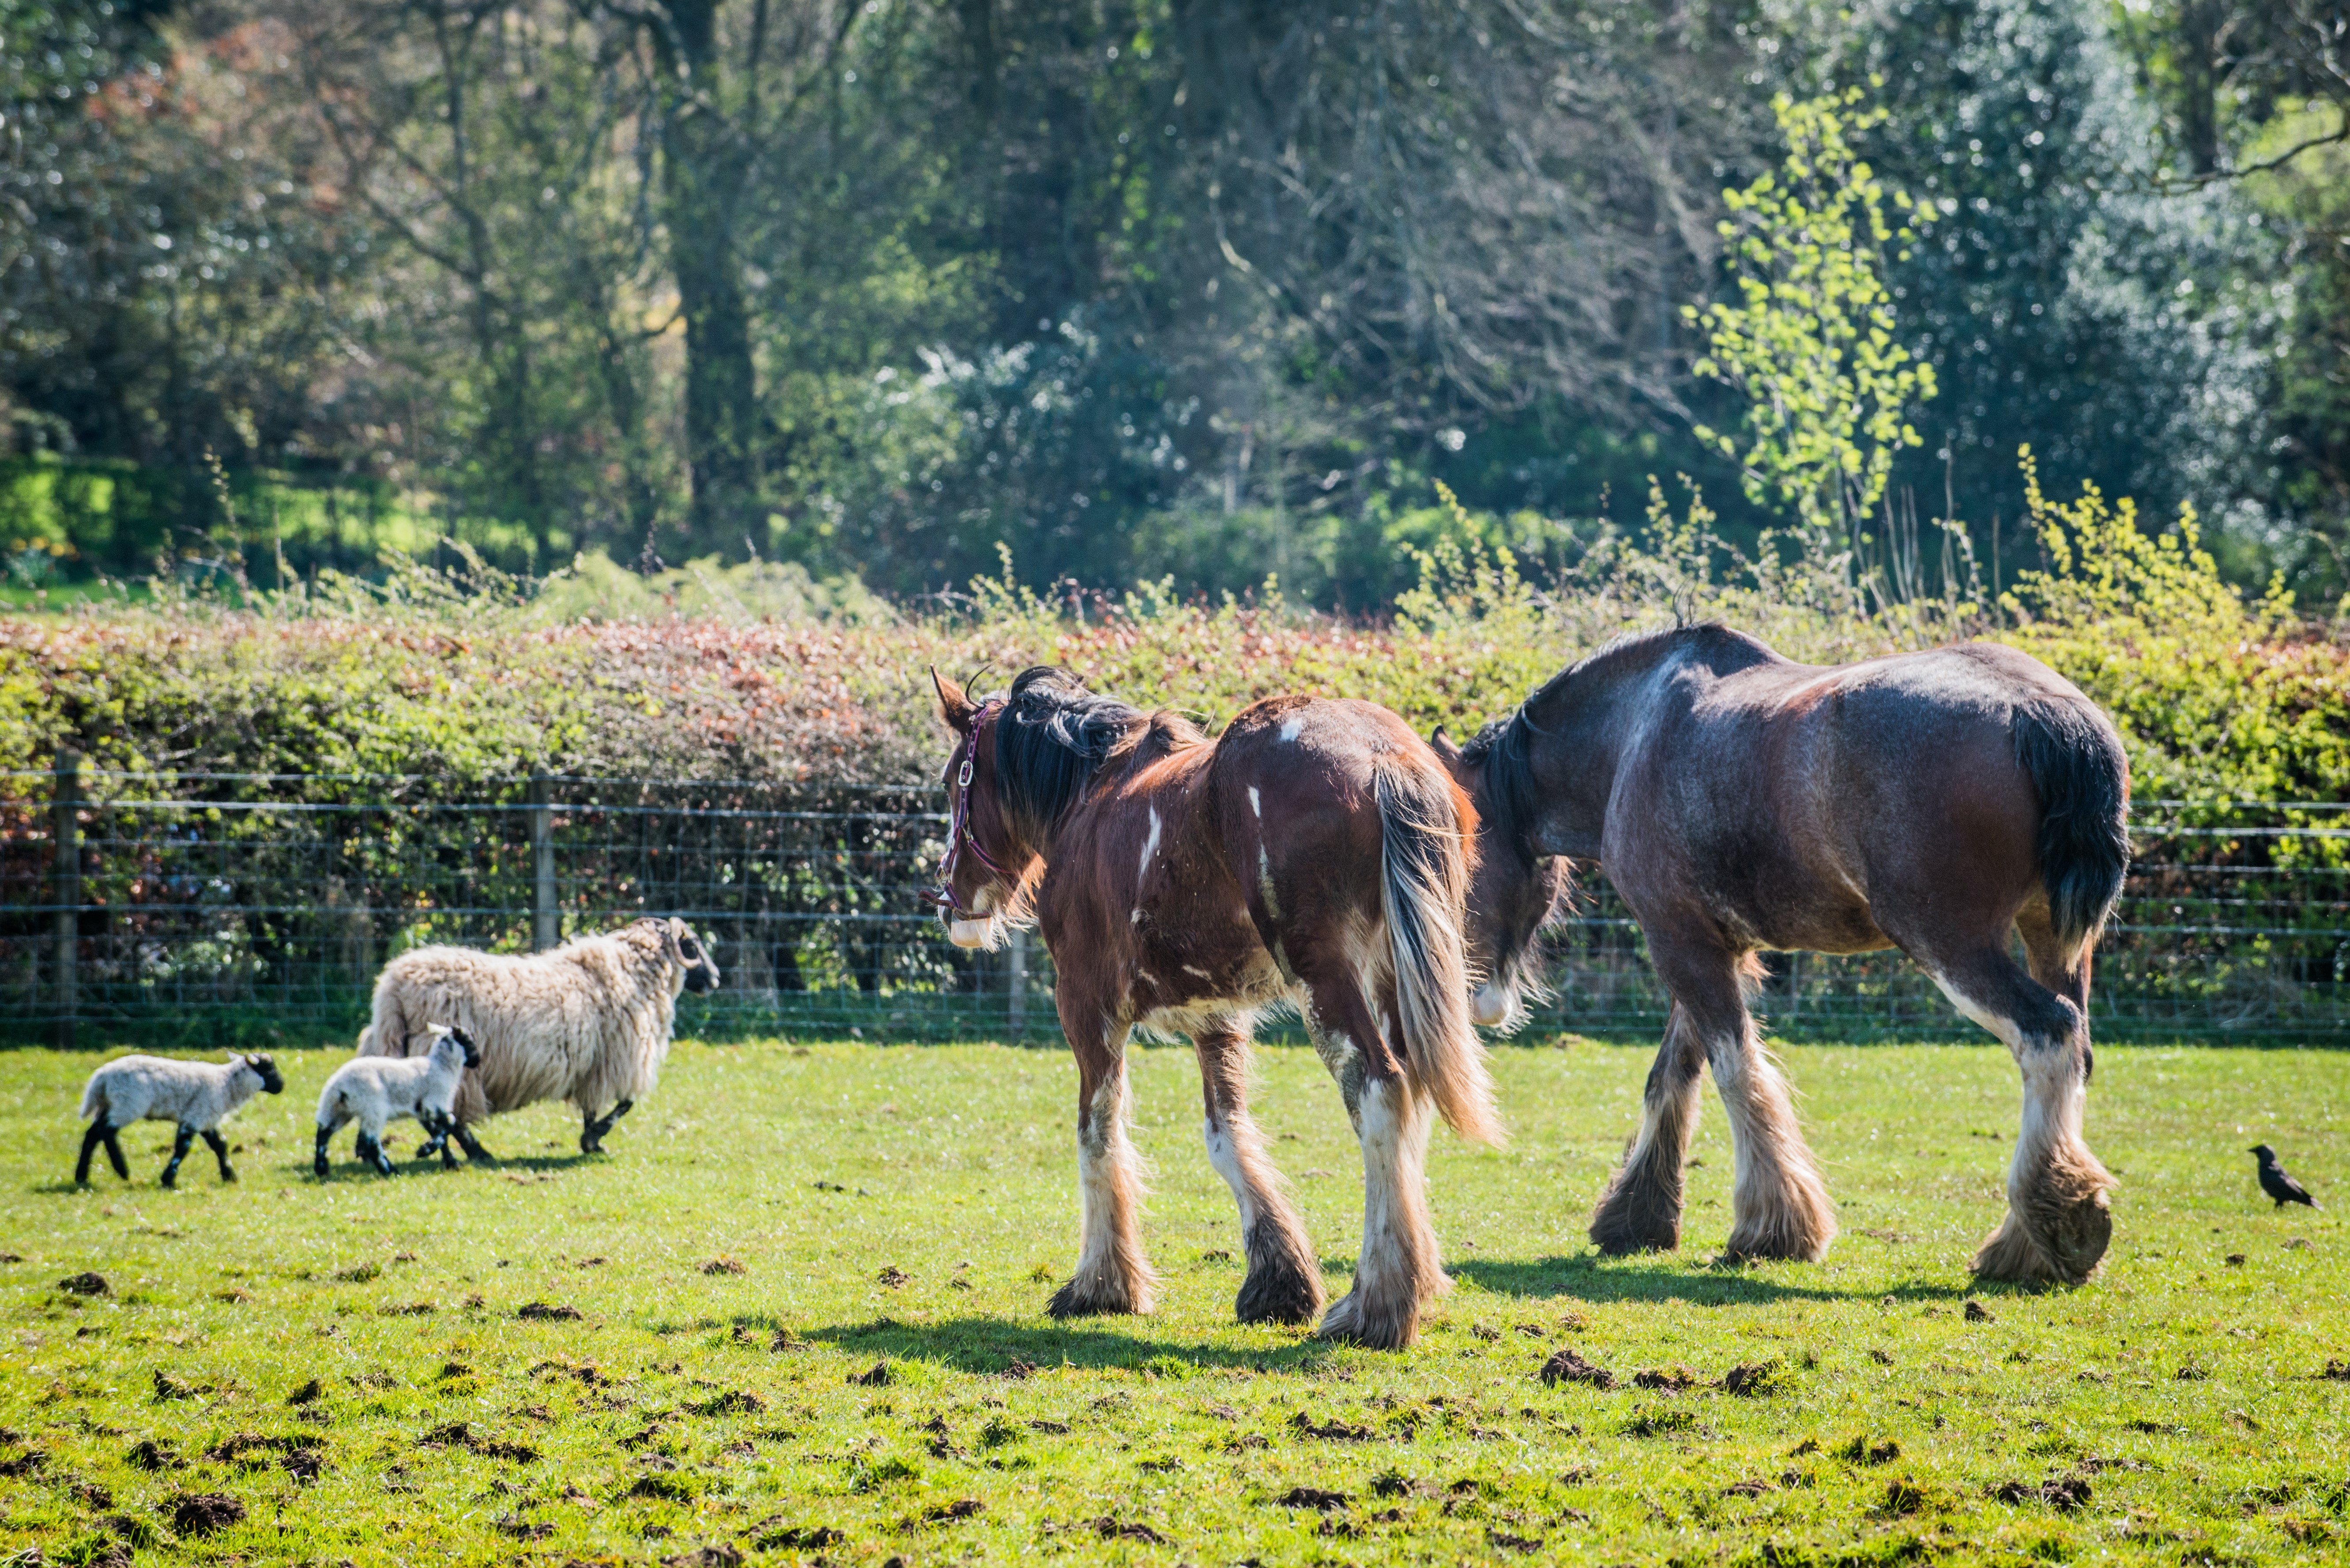 Two horses, a sheep, and two lambs in a grassy field at the National Museum of Rural Life. 